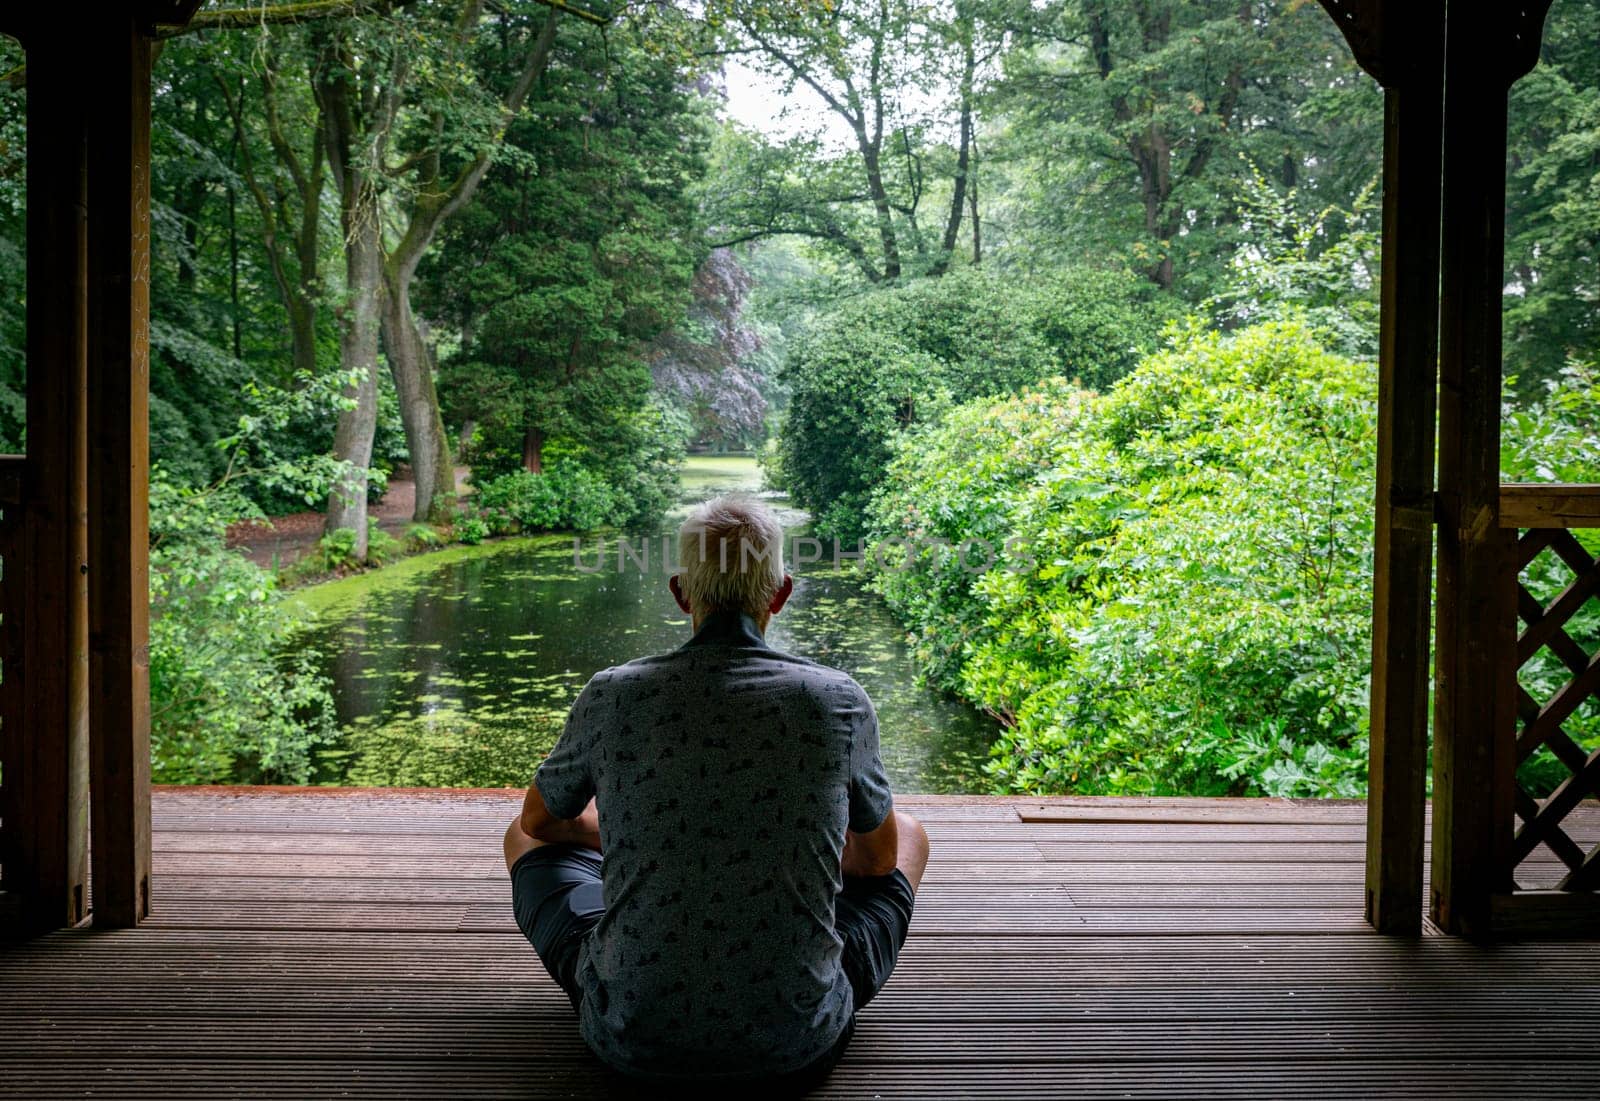 an adult white man with gray hair is thinking or meditating on a wooden decking overlooking a park with a pond and green plants and trees